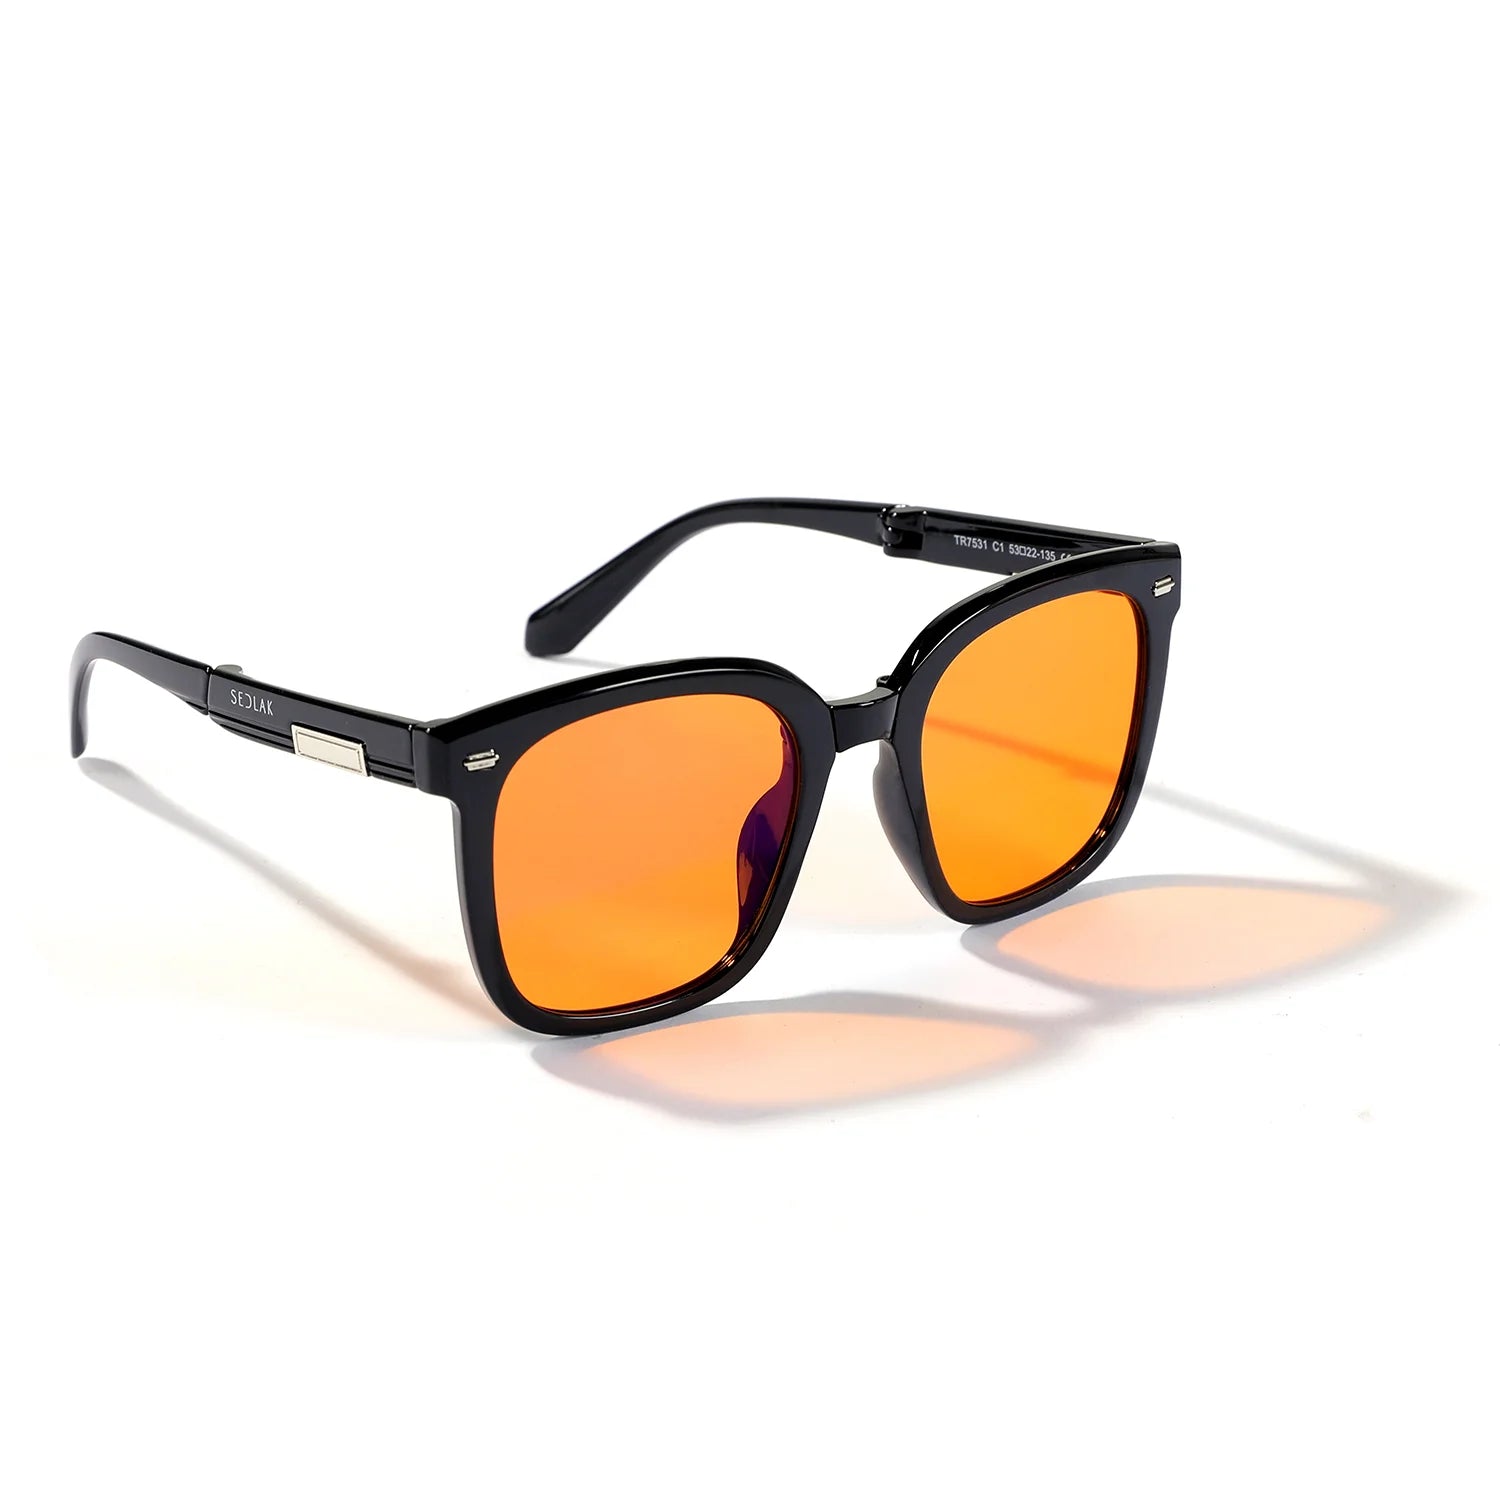 Black sunglasses with orange reflective lenses against a white background.